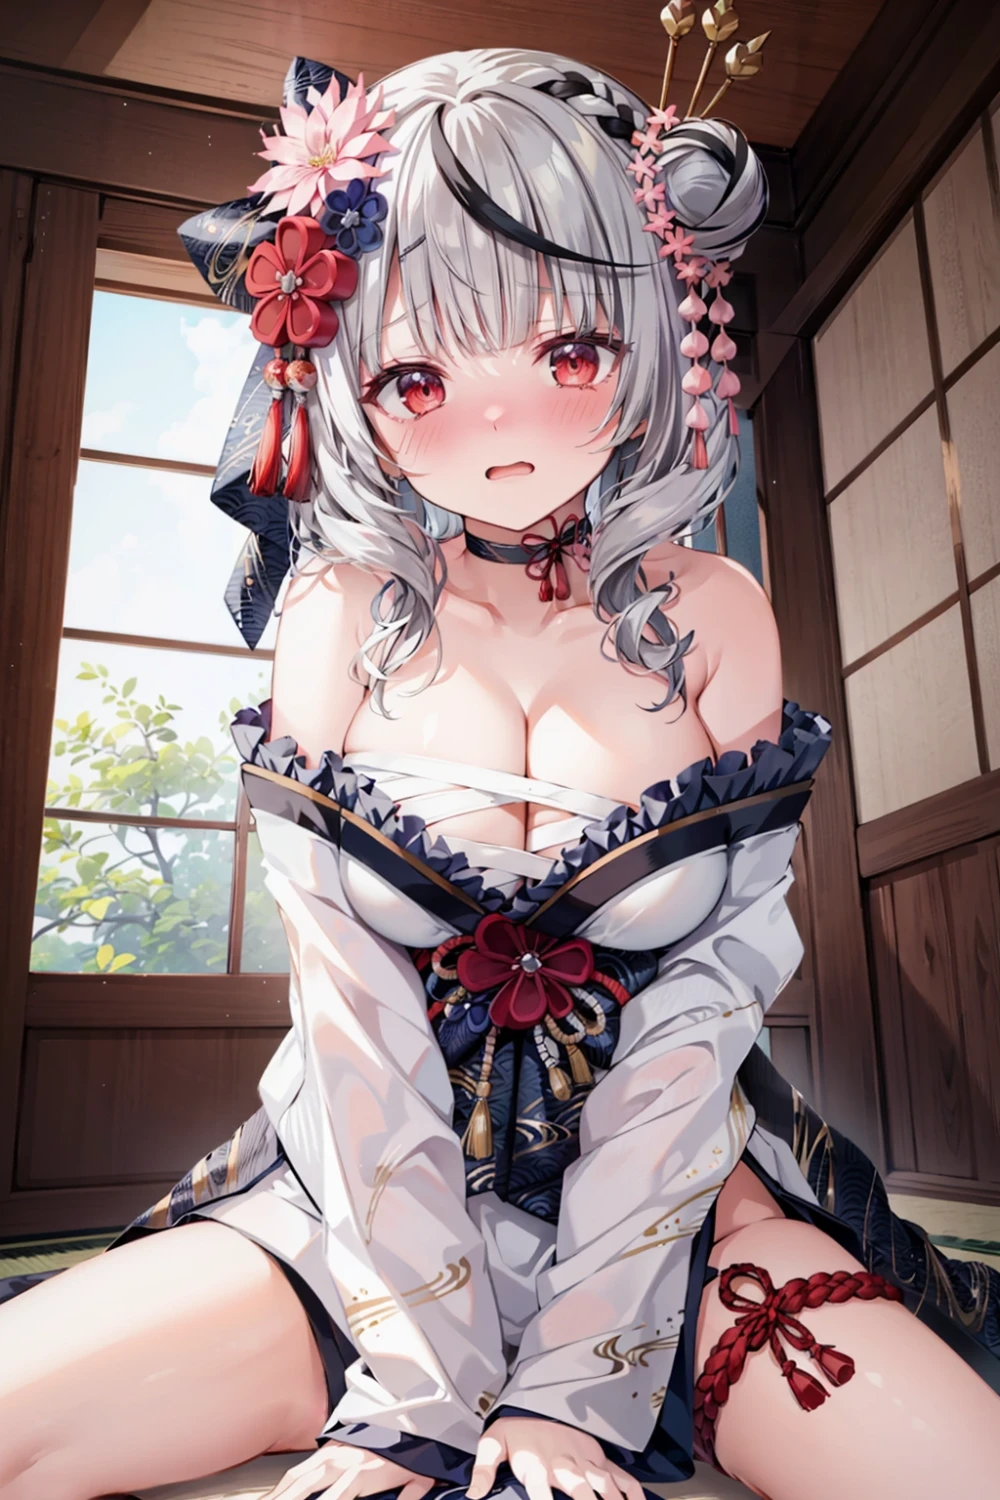 cleavage-anime-style-all-ages-16